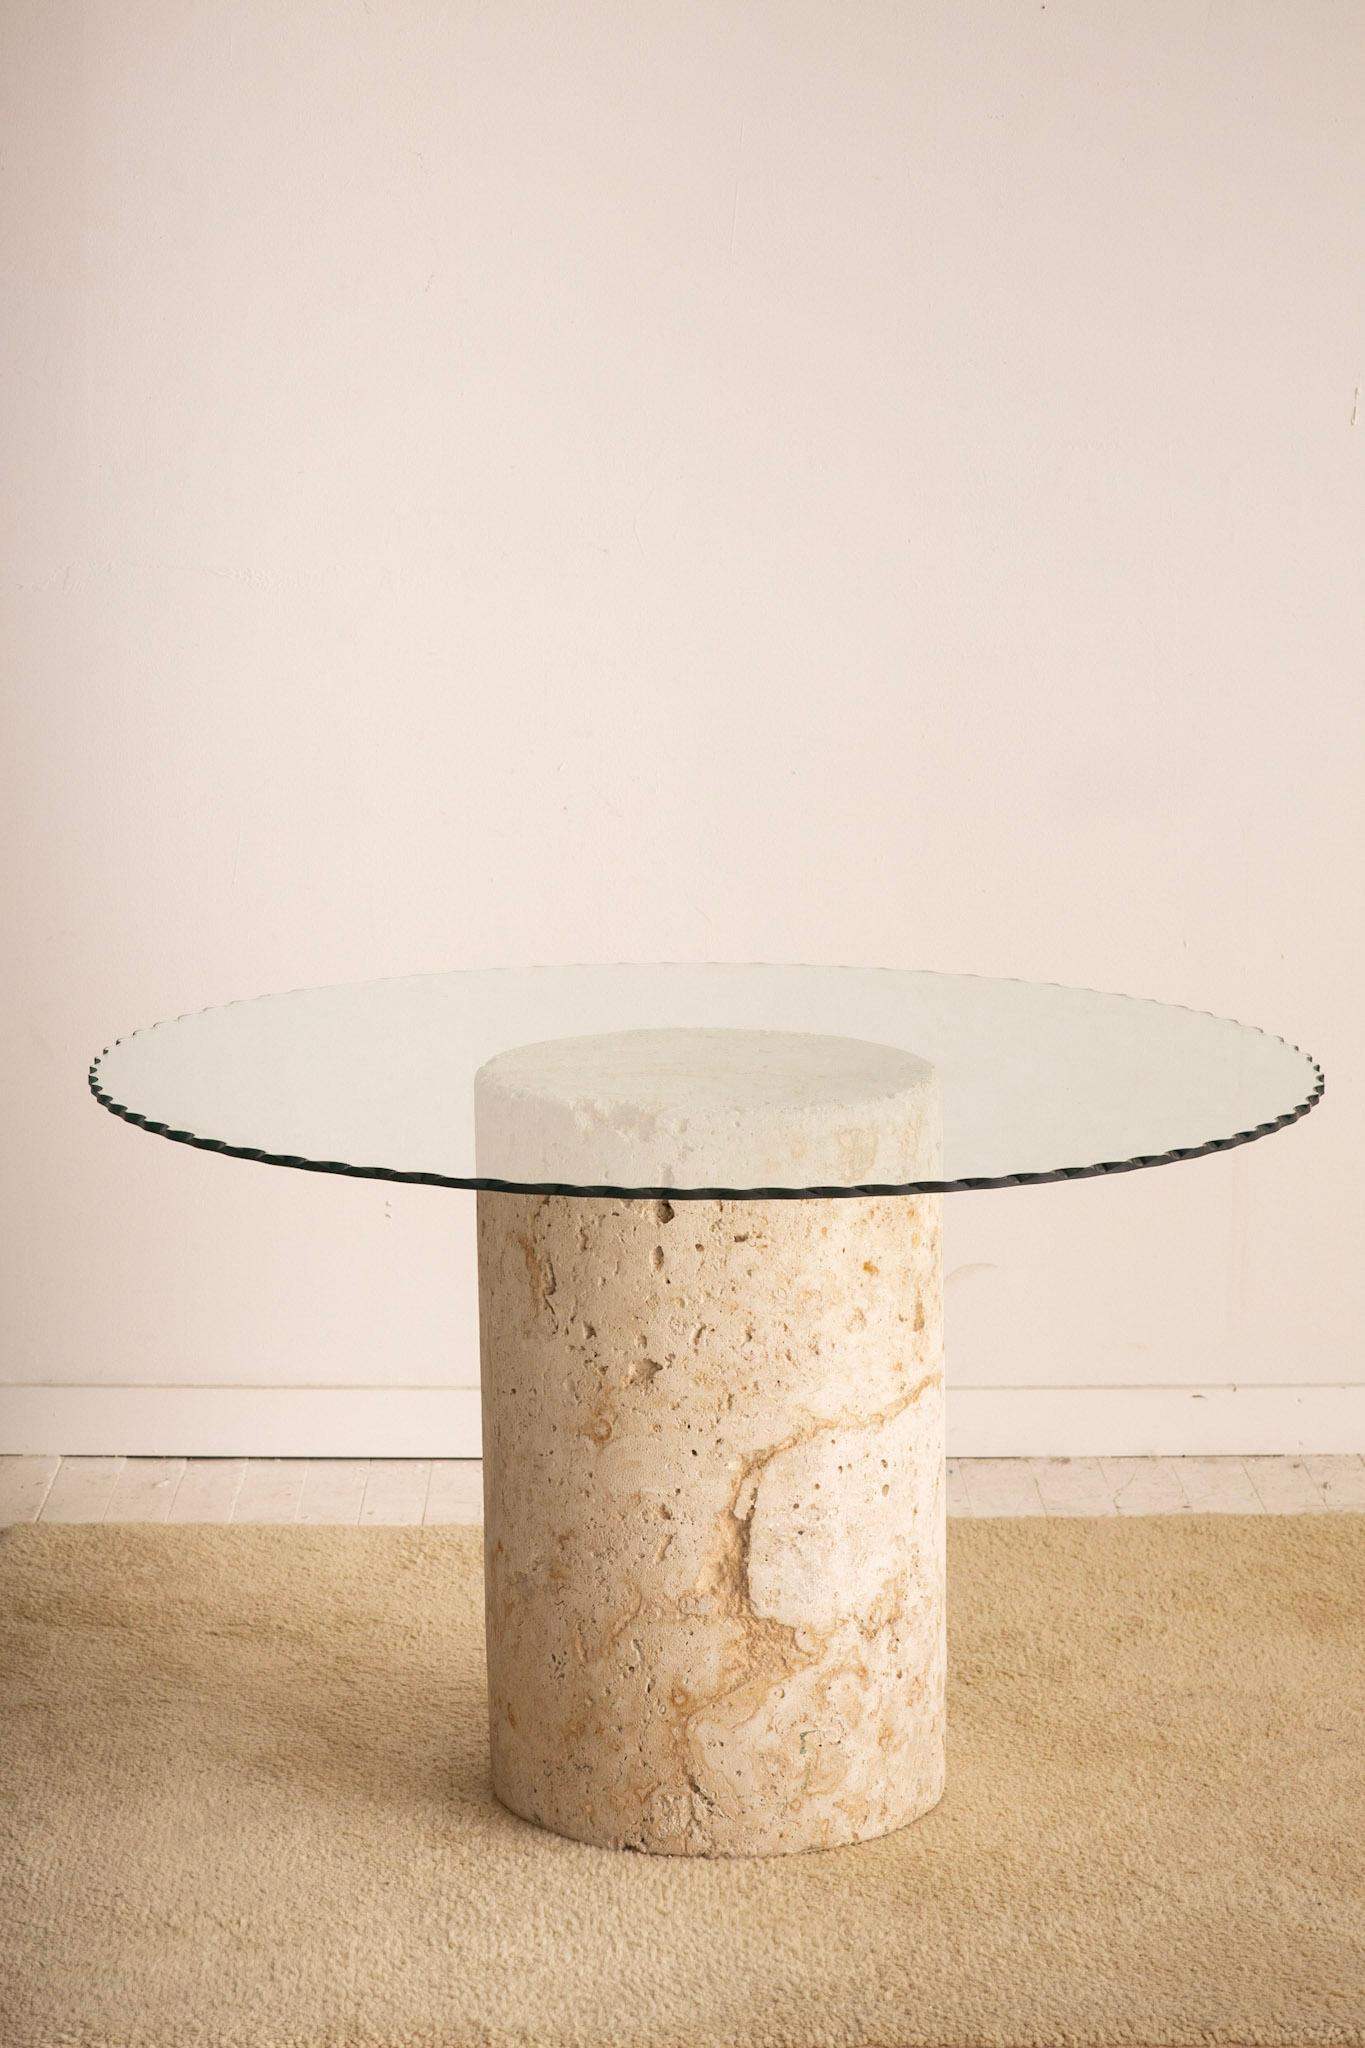 Solid limestone monolith dining table. Cylinder shaped base with scalloped edge glass top. Matte finish with wonderful texture and color variations throughout. Due to the nature of the stone minor losses are expected throughout. Please account for